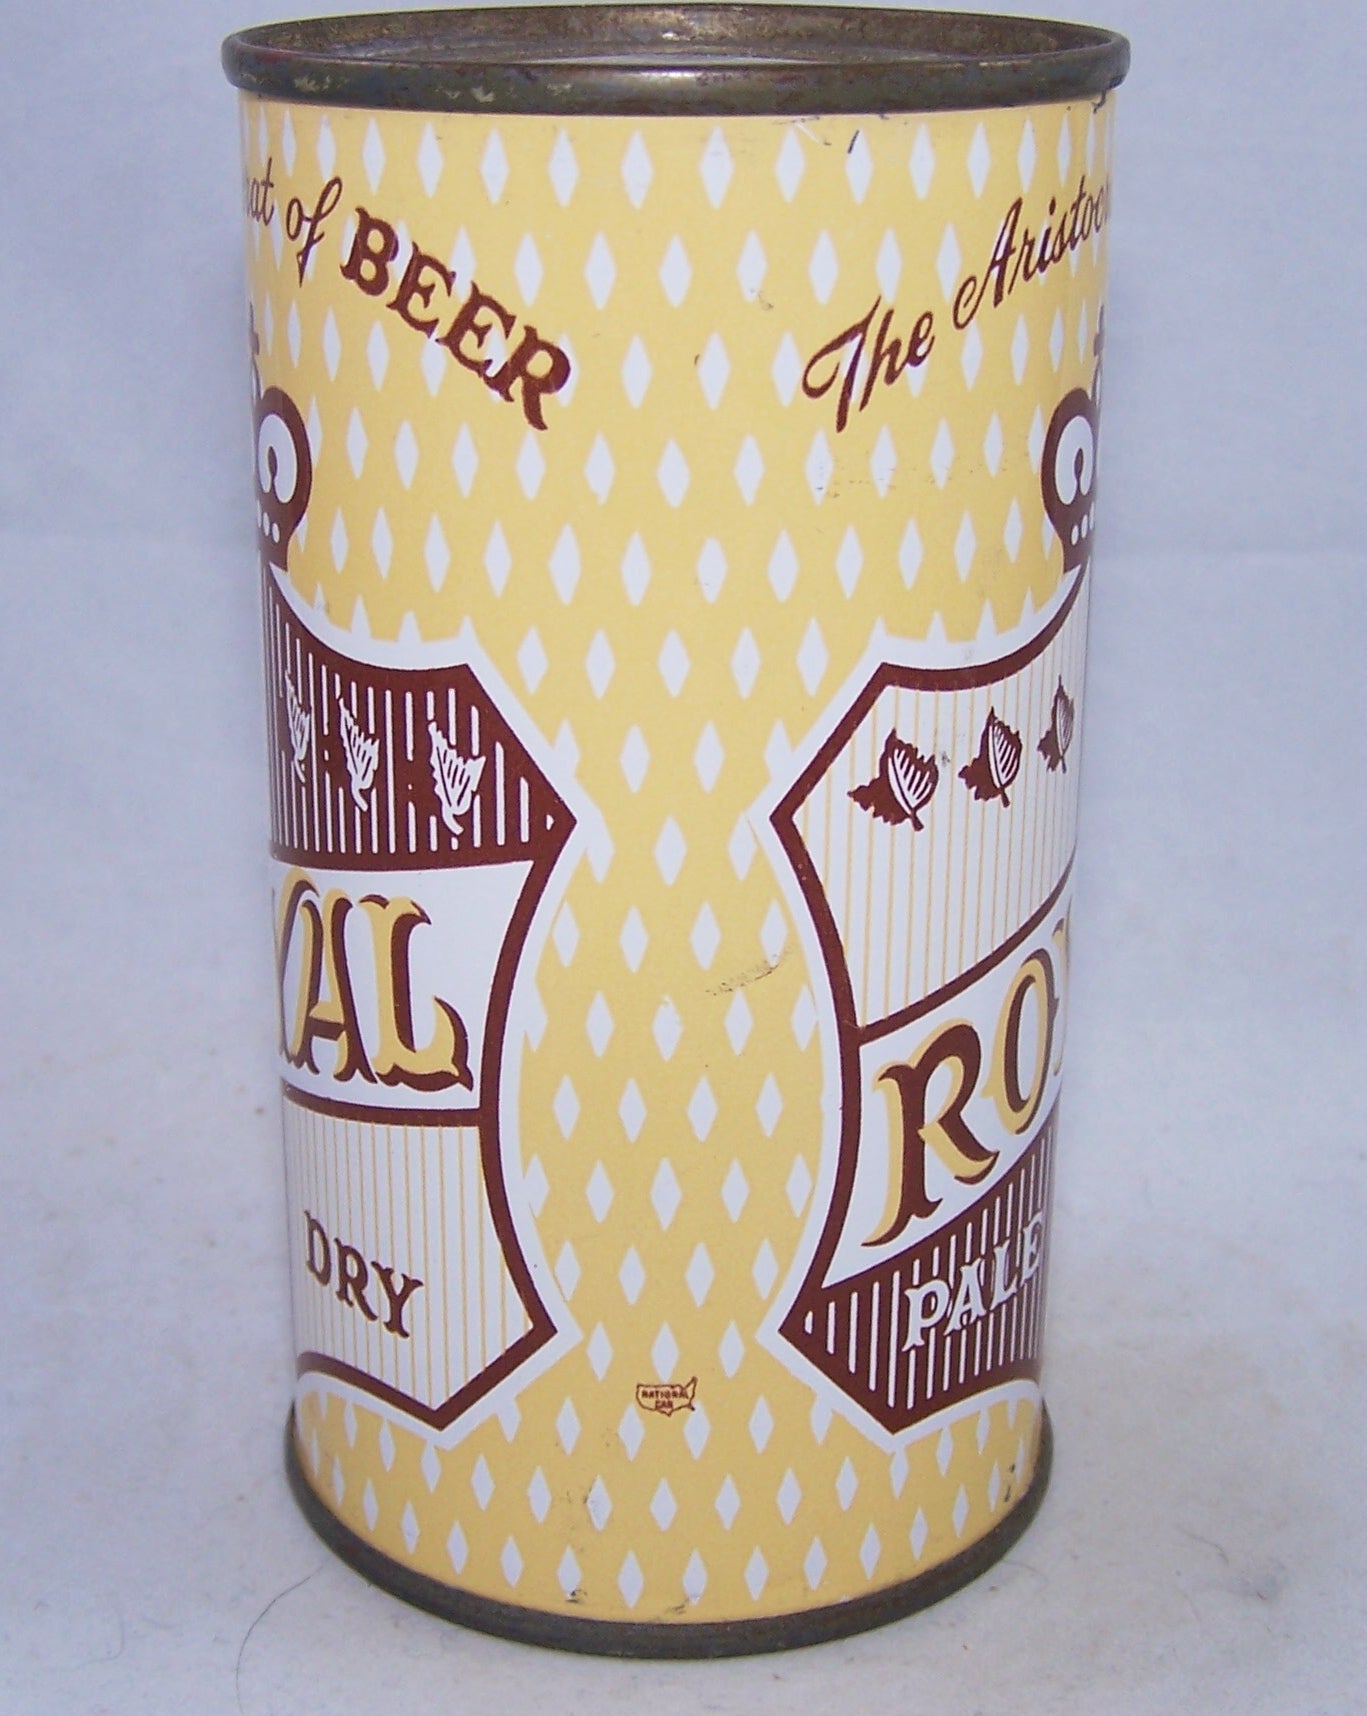 Royal Pale Dry Beer, USBC 125-21, Grade 1/1+  Sold on 01/16/19